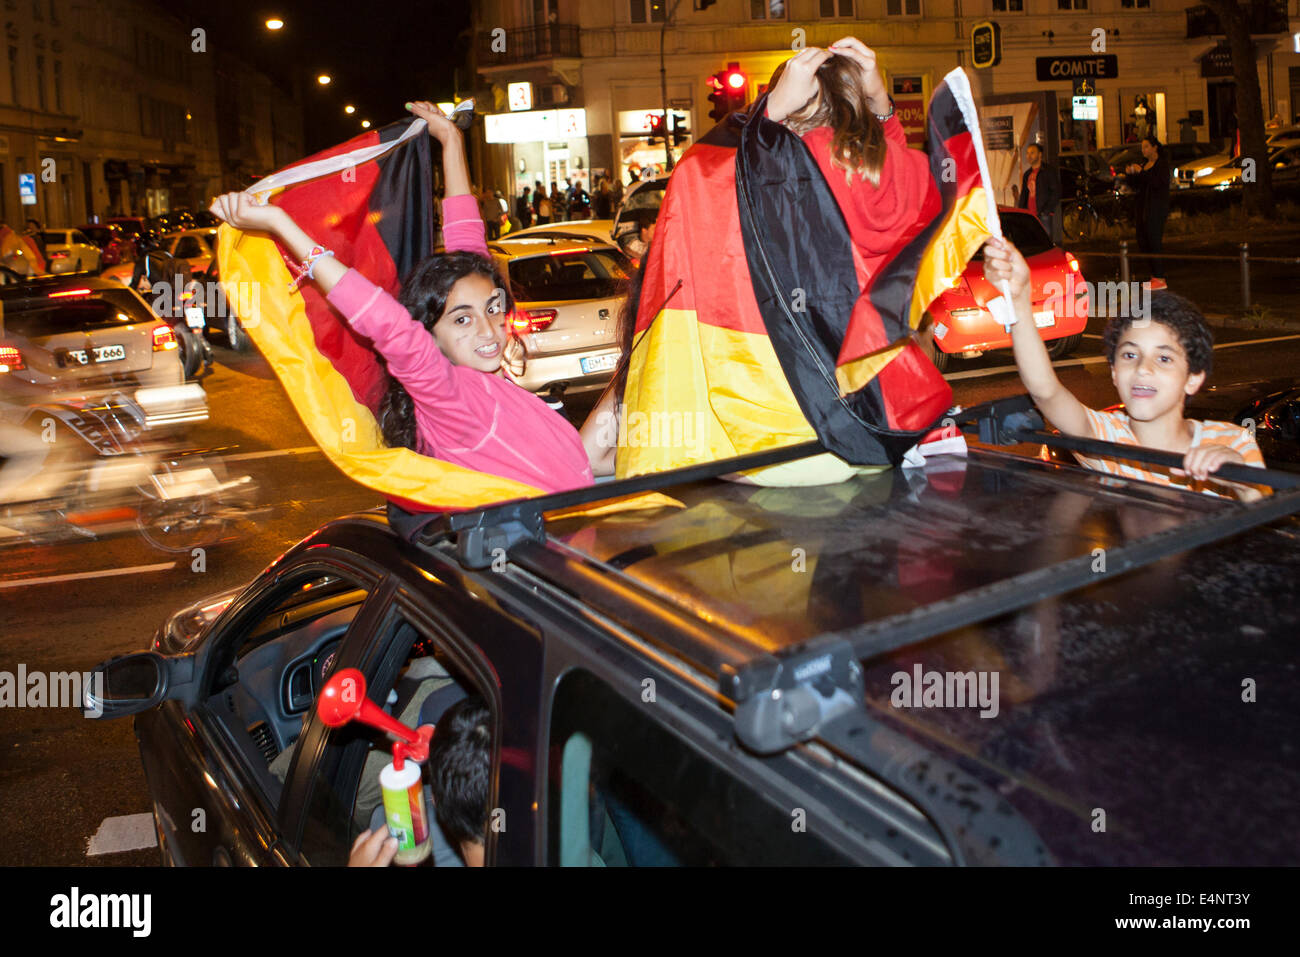 Wiesbaden, Germany. 14th July, 2014. Germany wins the FIFA World Cup 2014. People in their cars and on the street cheering and celebrating in downtown Wiesbaden after Germanys victory over Argentina in the final match. Some motion blur. Credit:  Oliver Kessler/Alamy Live News Stock Photo